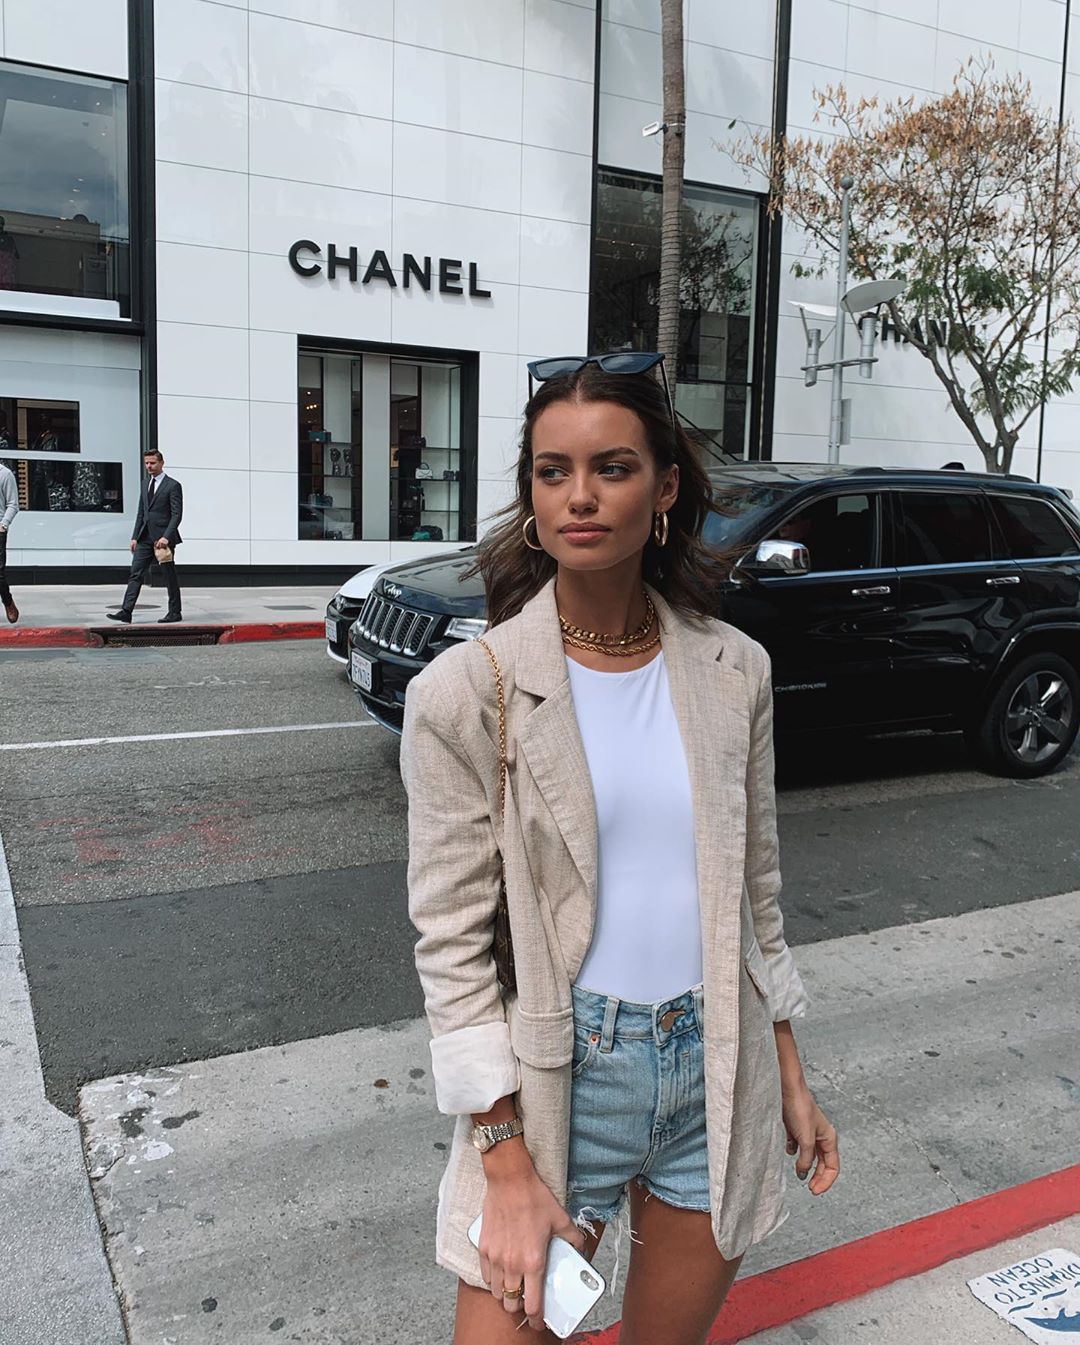 This Model’s Off-Duty Style Is Incredibly Chic